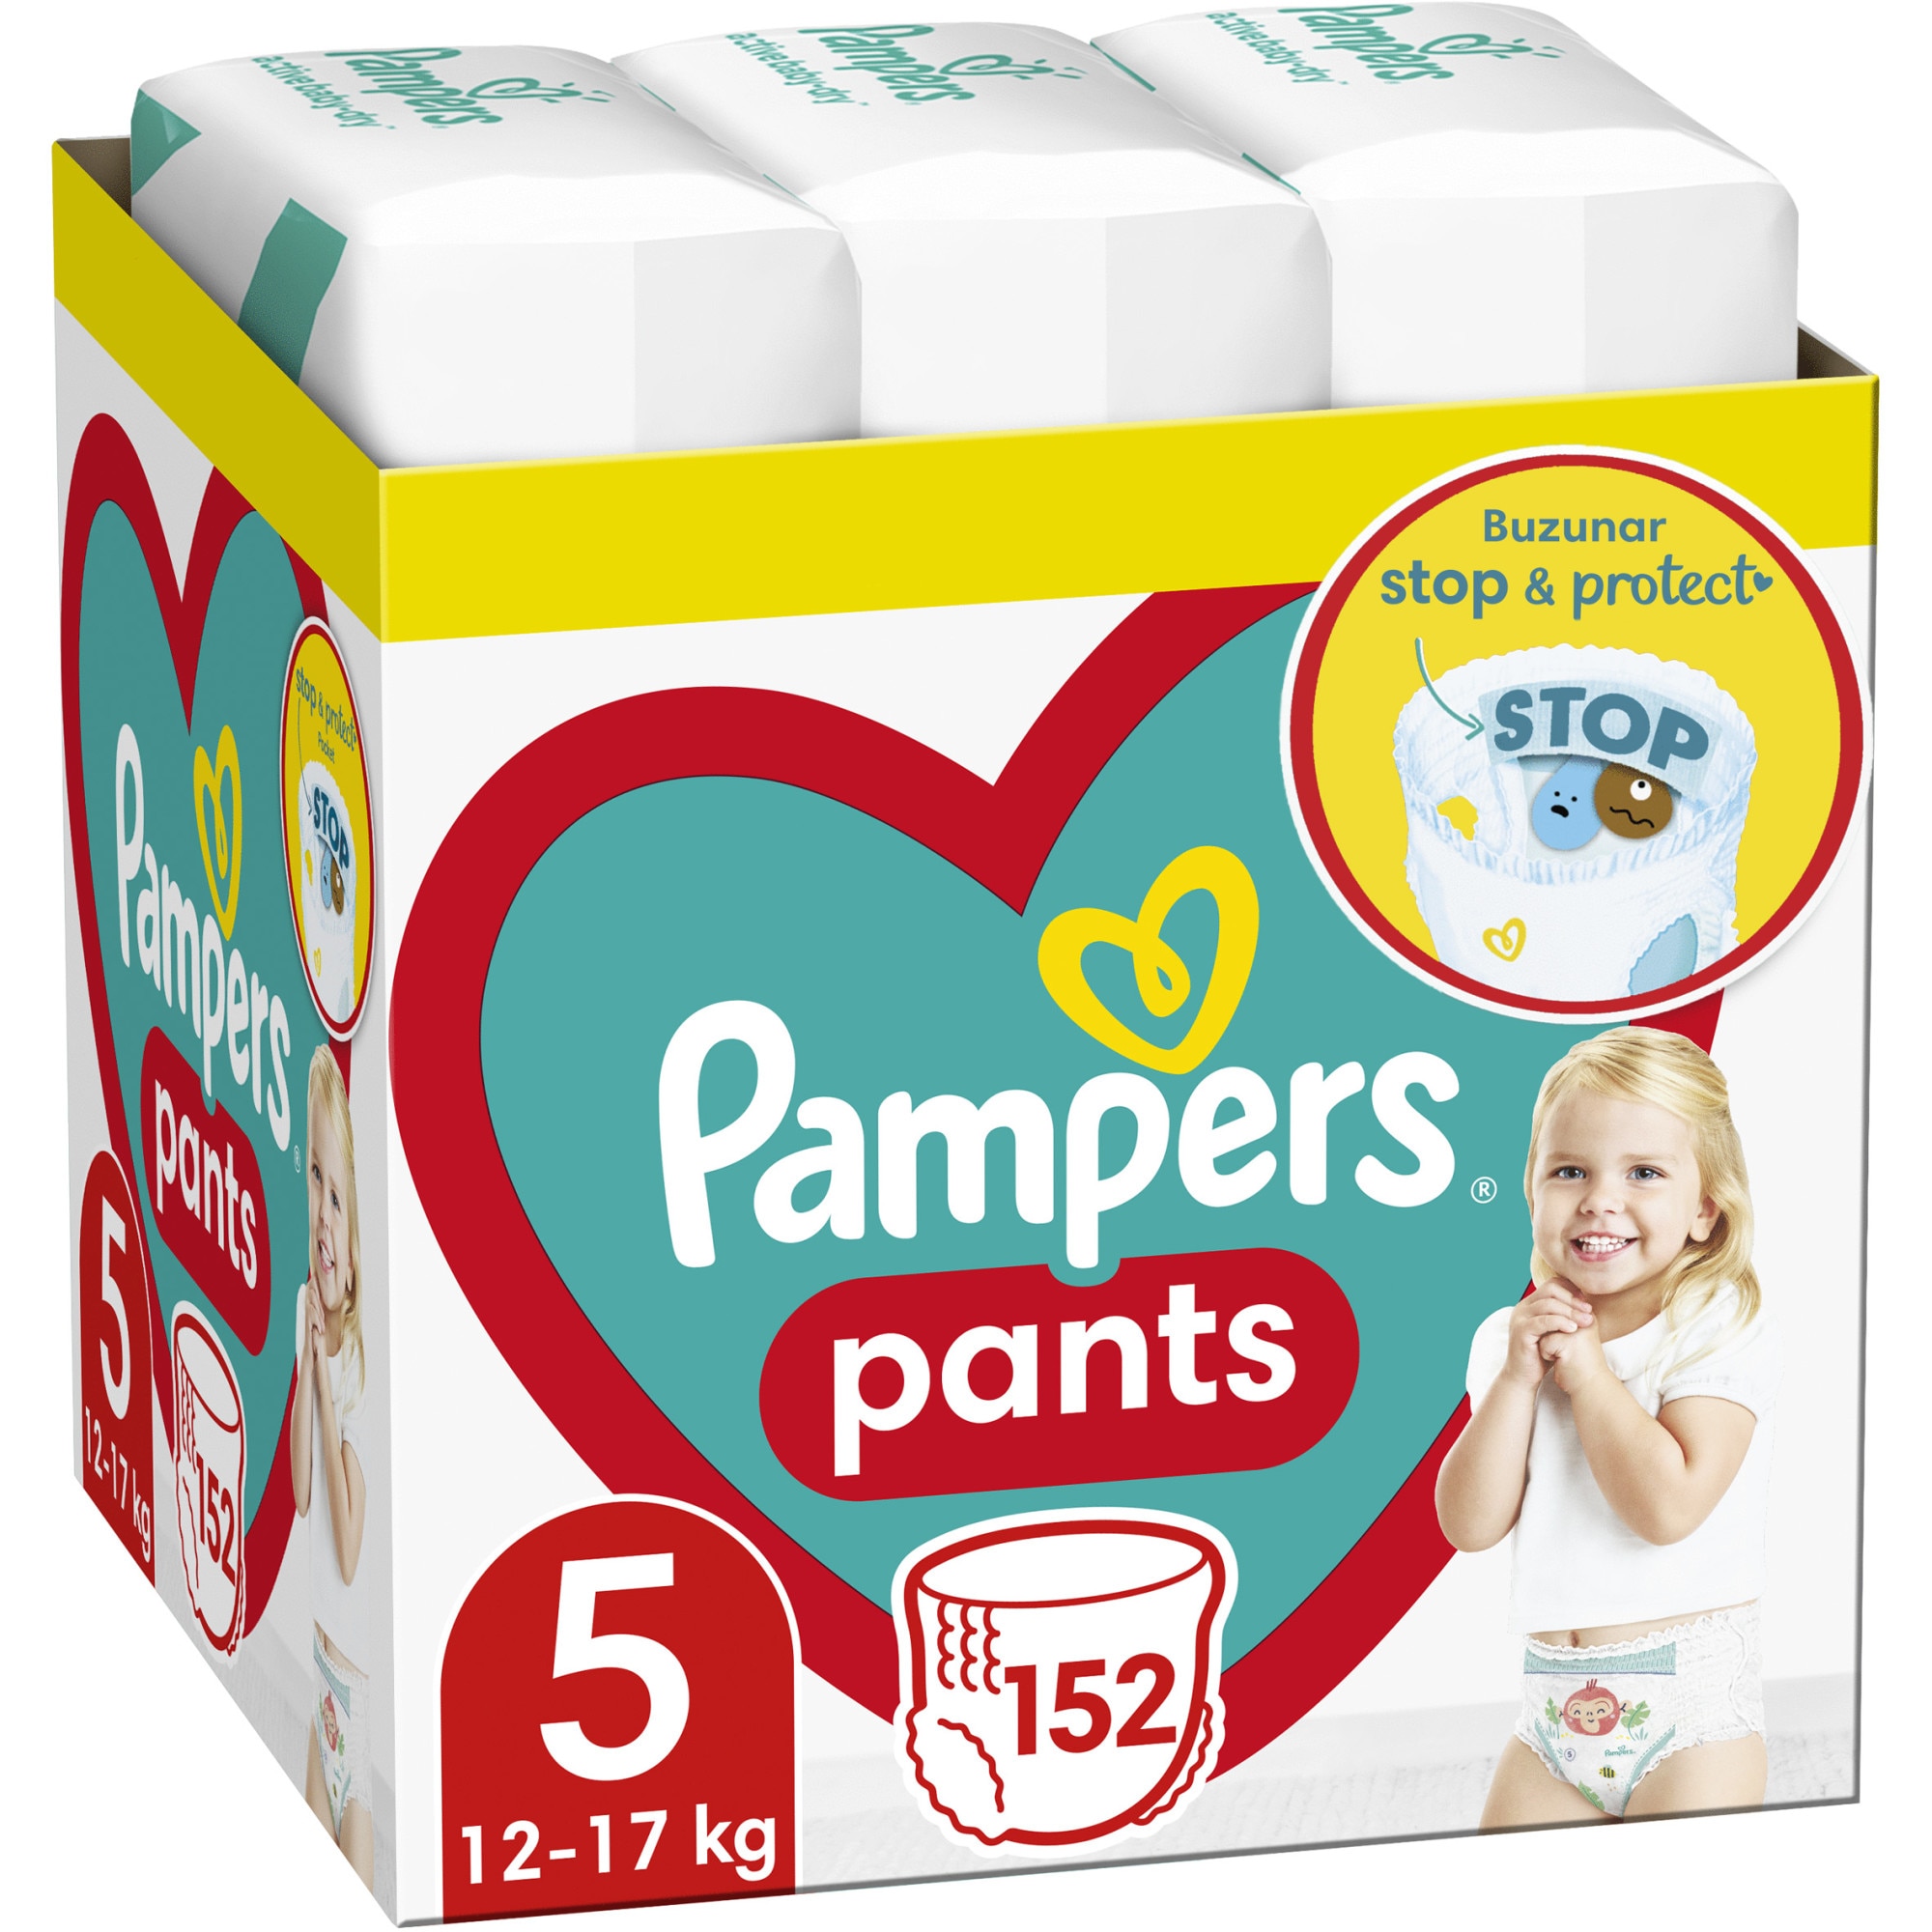 Cloudy Protestant Mart Scutece-chilotel Pampers Pants XXL Box Marimea 5, 12-17 kg, 152 buc - eMAG .ro